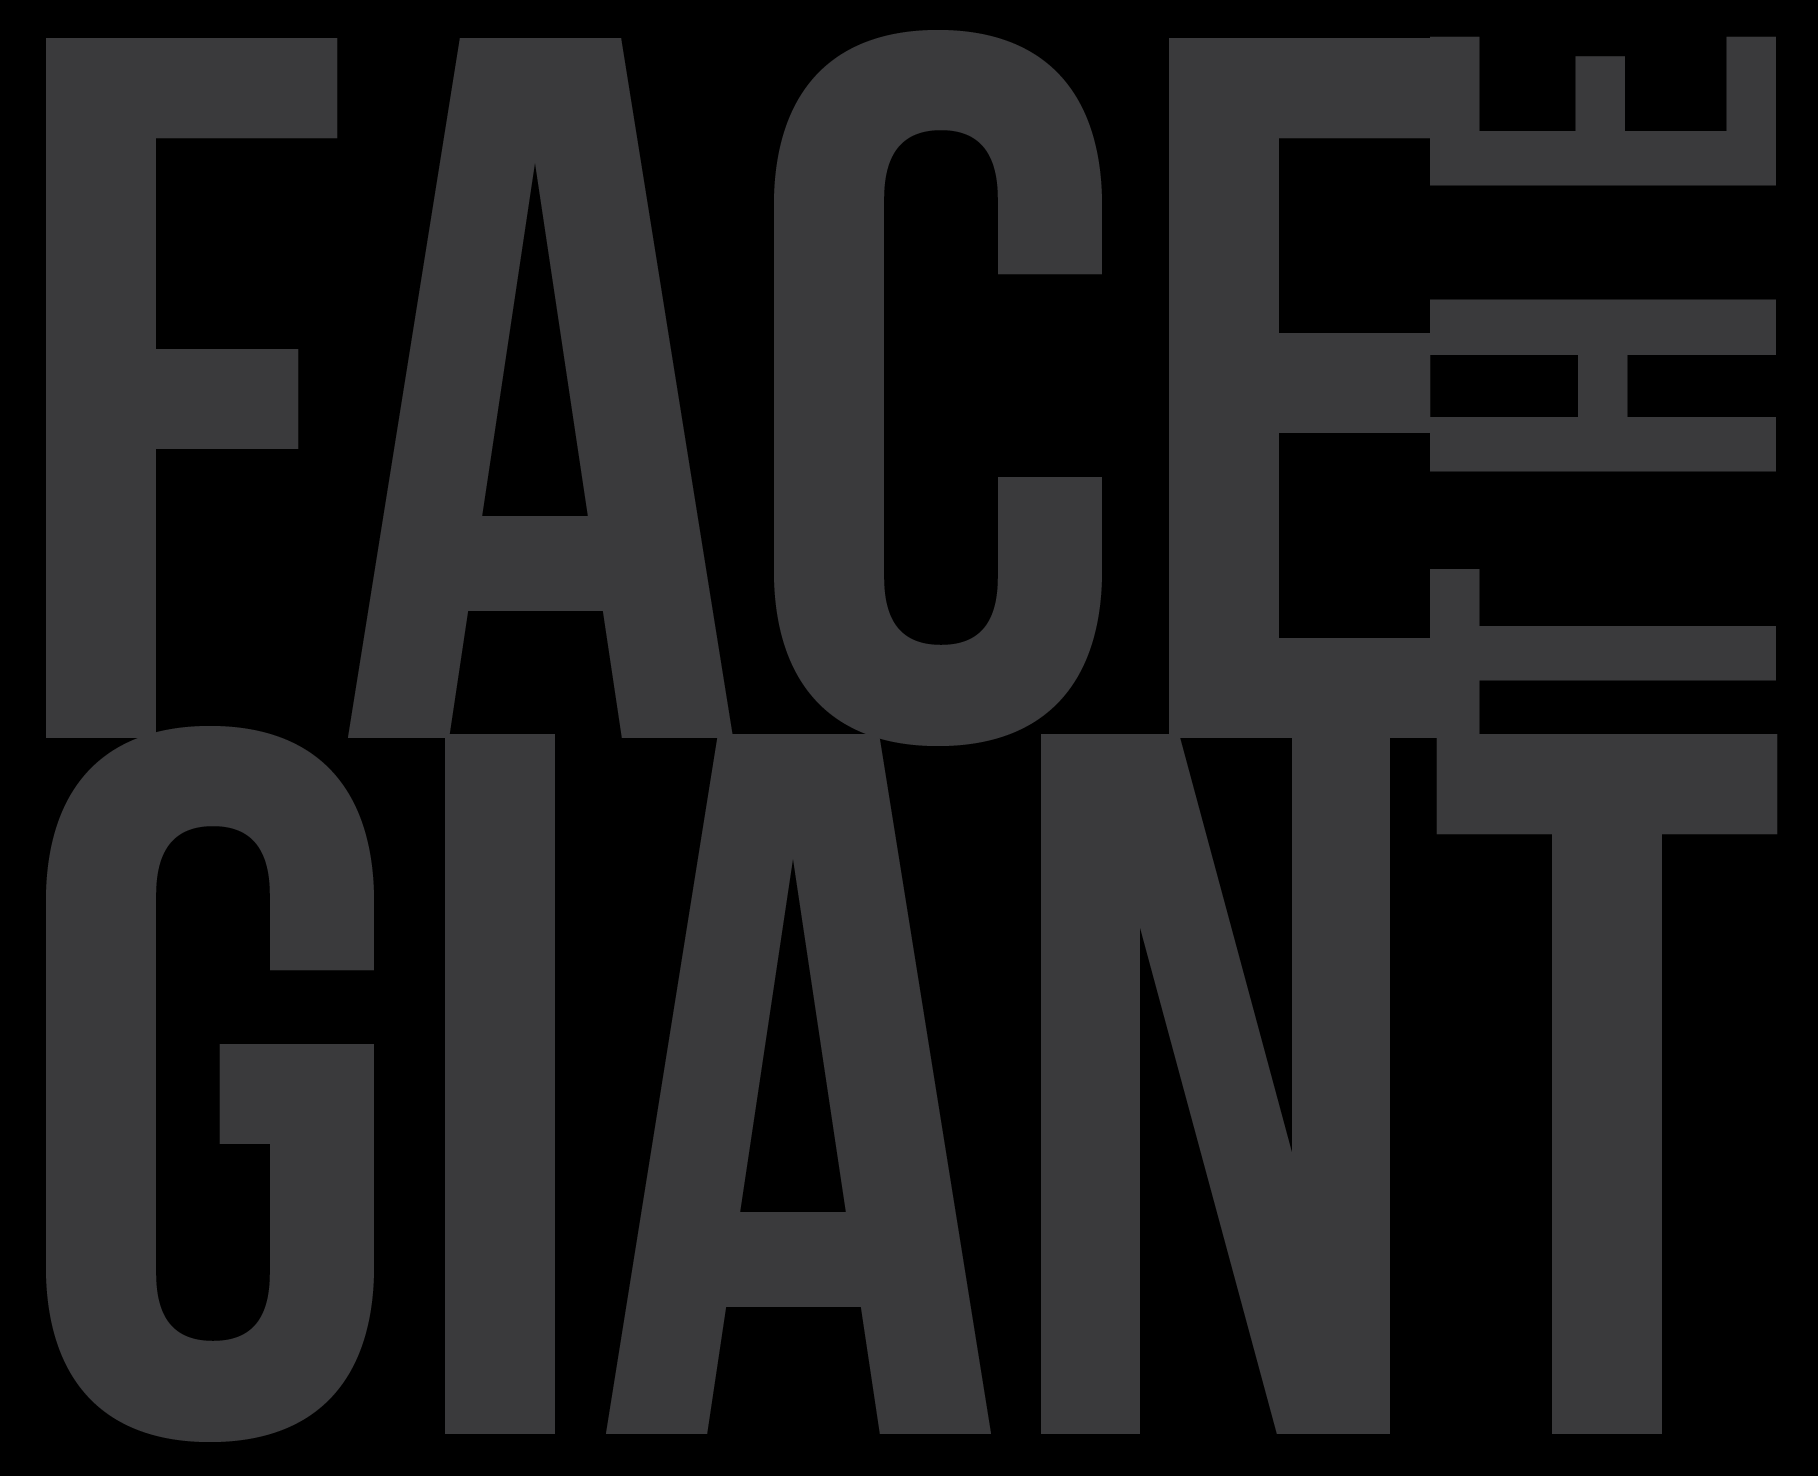 Client: Face The Giant, rock band from San Francisco, CA. Description: Created a new logo for this San Francisco rock band.